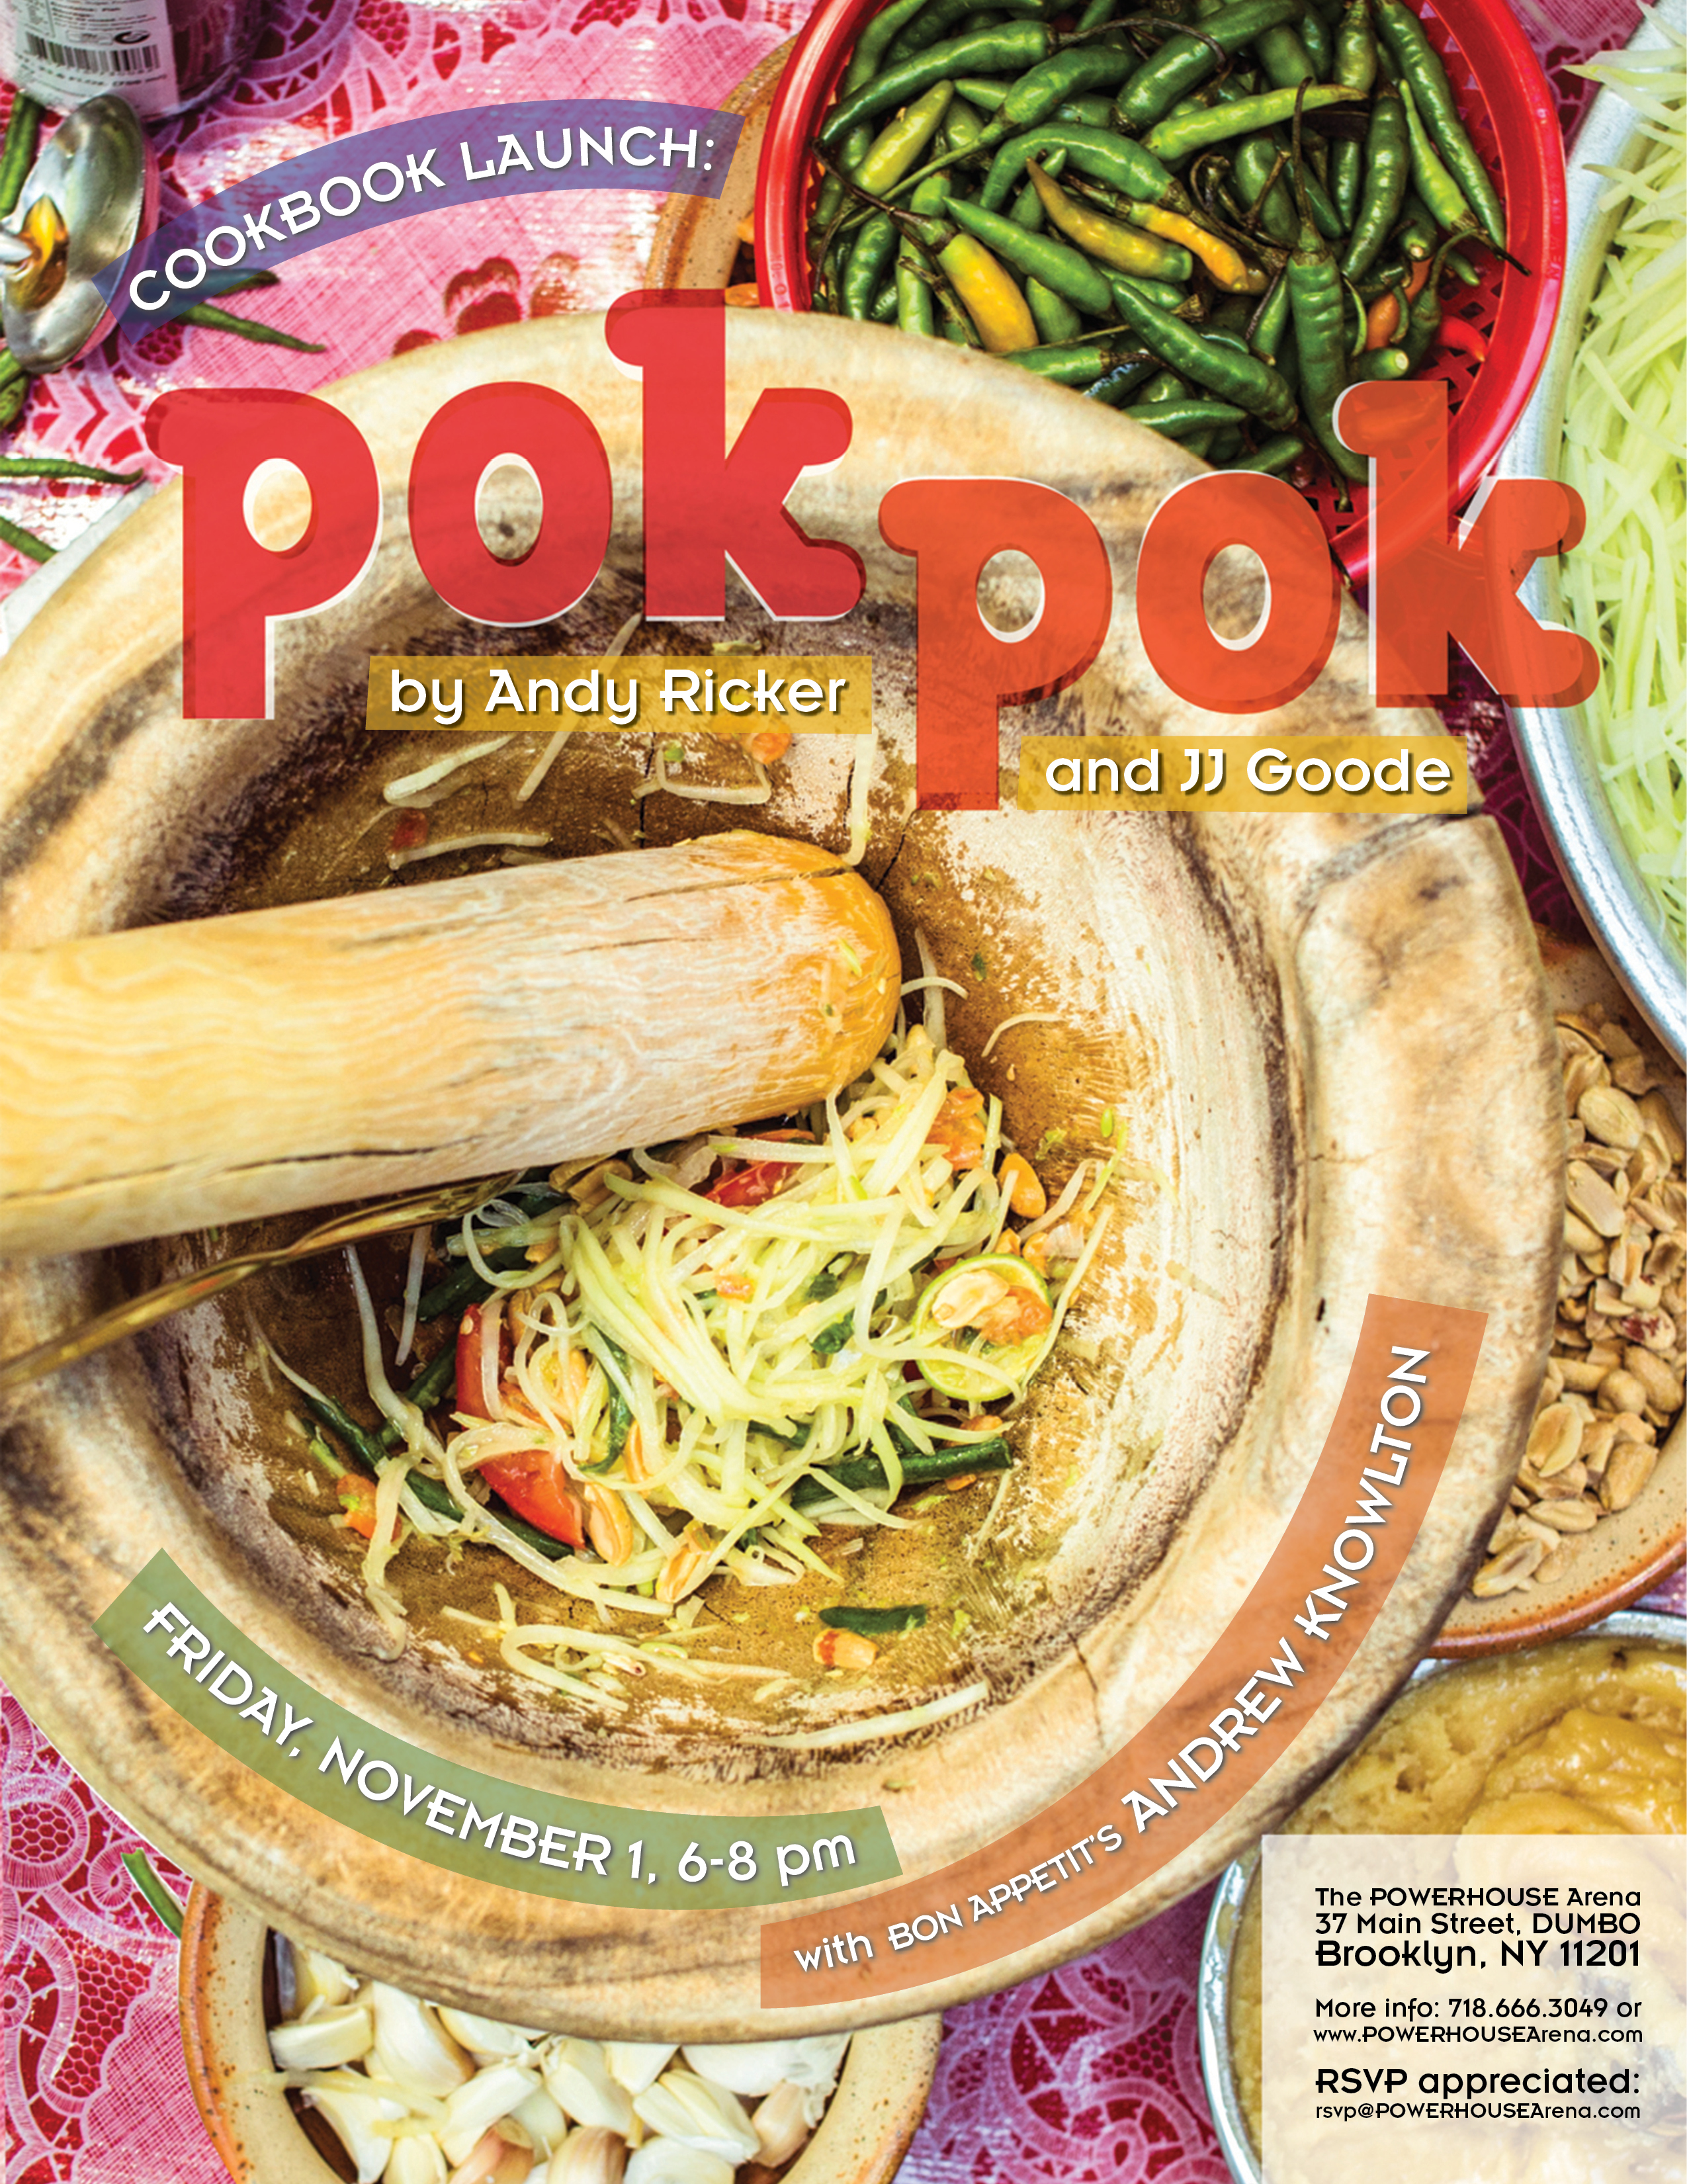 Cookbook Launch: Pok Pok by Andy Ricker and JJ Goode, with Bon Appétit's Andrew Knowlton